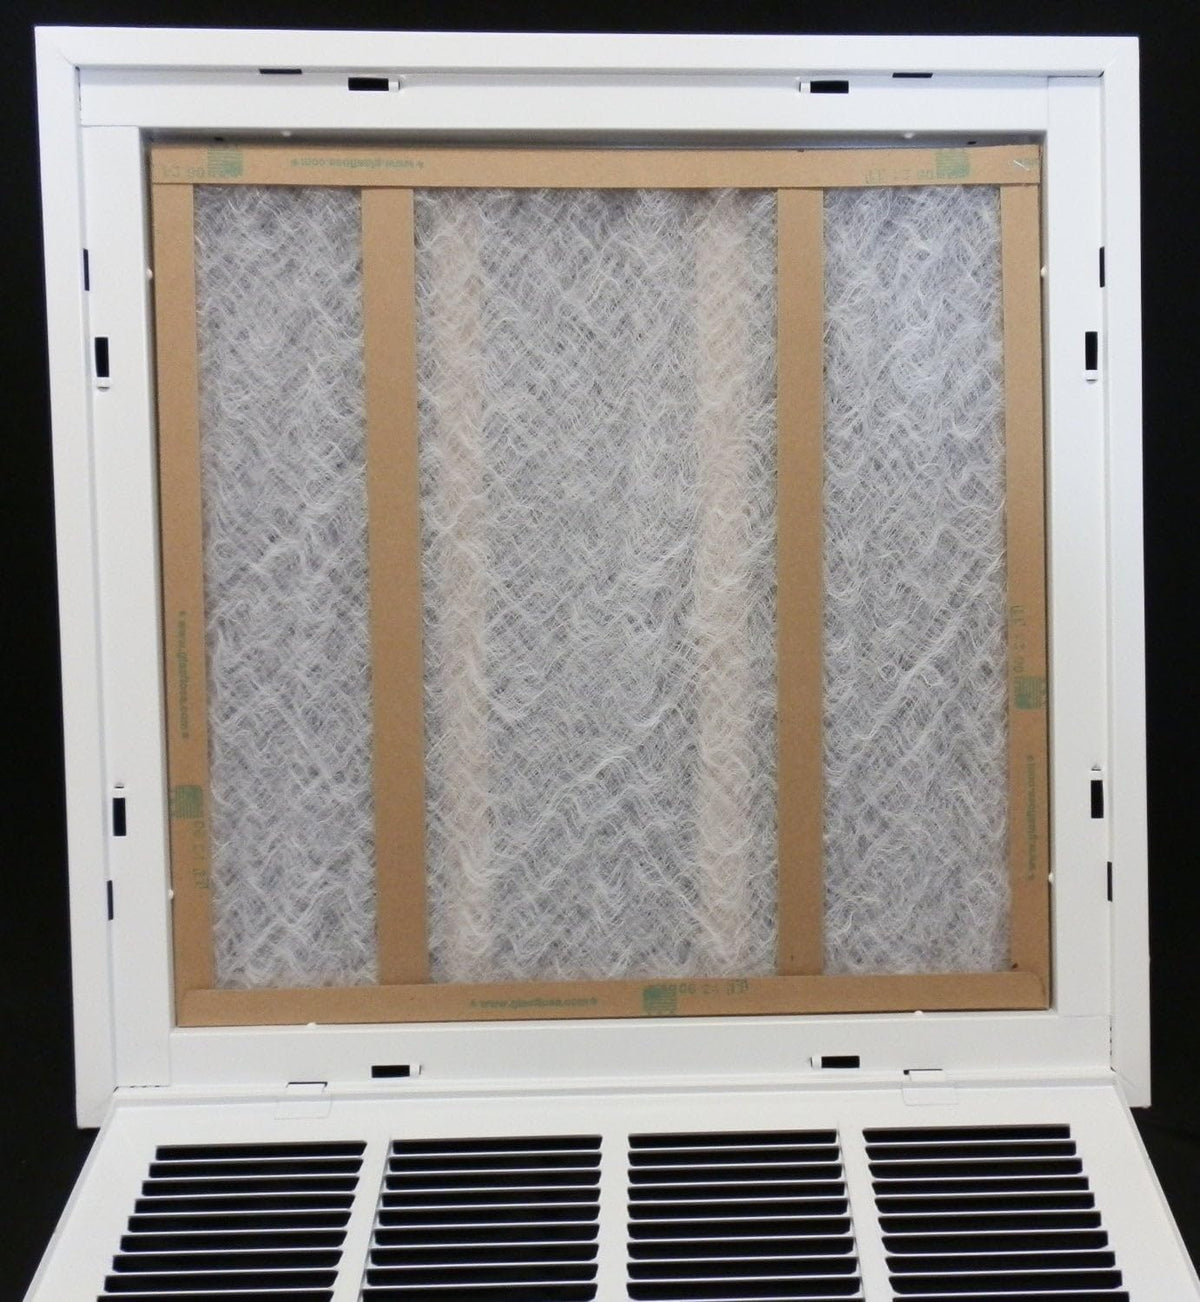 20&quot; X 8&quot; Steel Return Air Filter Grille for 1&quot; Filter -  Fixed Hinged - [Outer Dimensions: 22 5/8&quot; X 10 5/8&quot;]